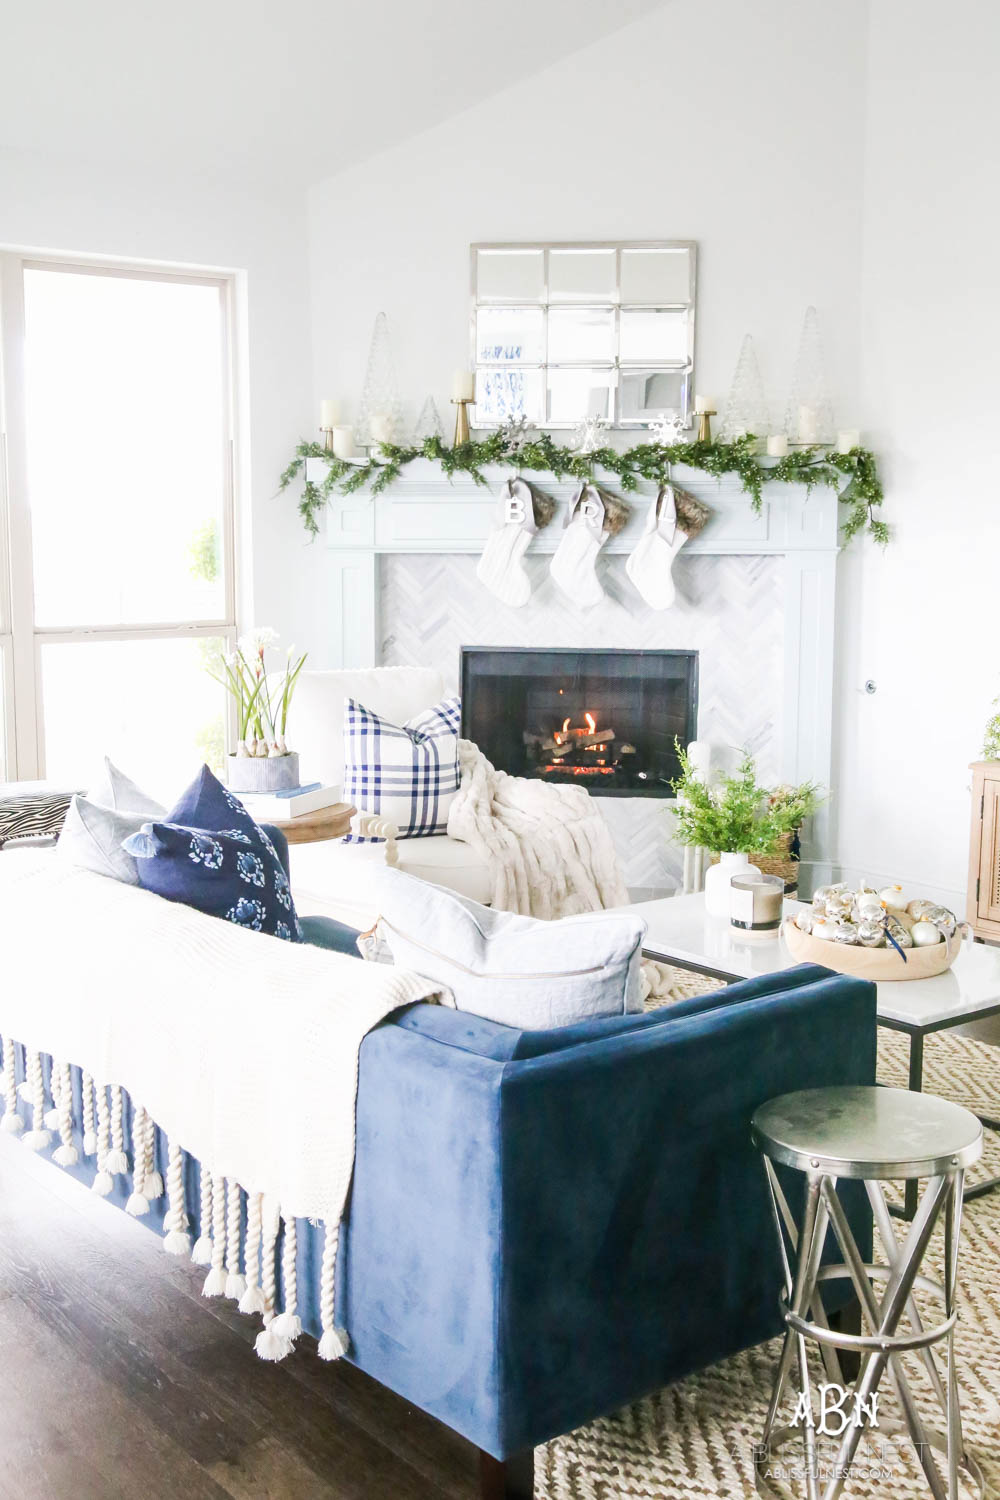 Gorgeous blue and silver Christmas mantle décor with juniper berry garland and glass hurricane Christmas trees. Simple and festive holiday décor in this open concept living space. Check out all the white, silver and gold Christmas decor in this holiday home tour on ABlissfulNest.com. #ABlissfulNest #Christmasdecor #Christmasdecorating #CoastalChristmasdecor #christmastree #christmasmantle